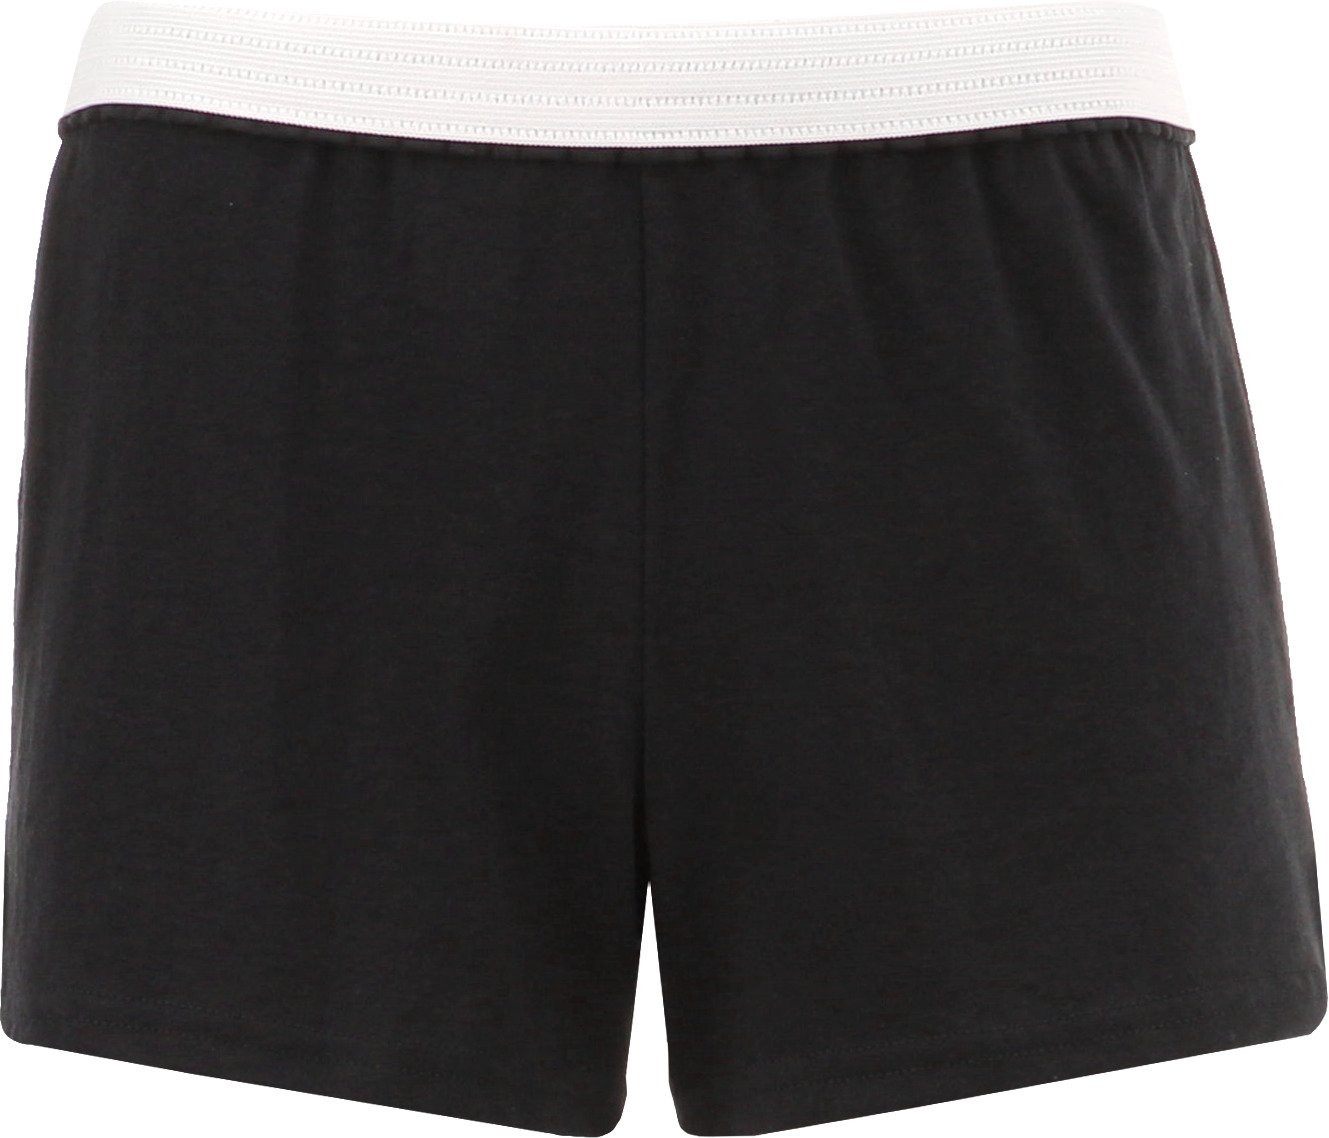 Soffe Juniors' Authentic Shorts | Academy